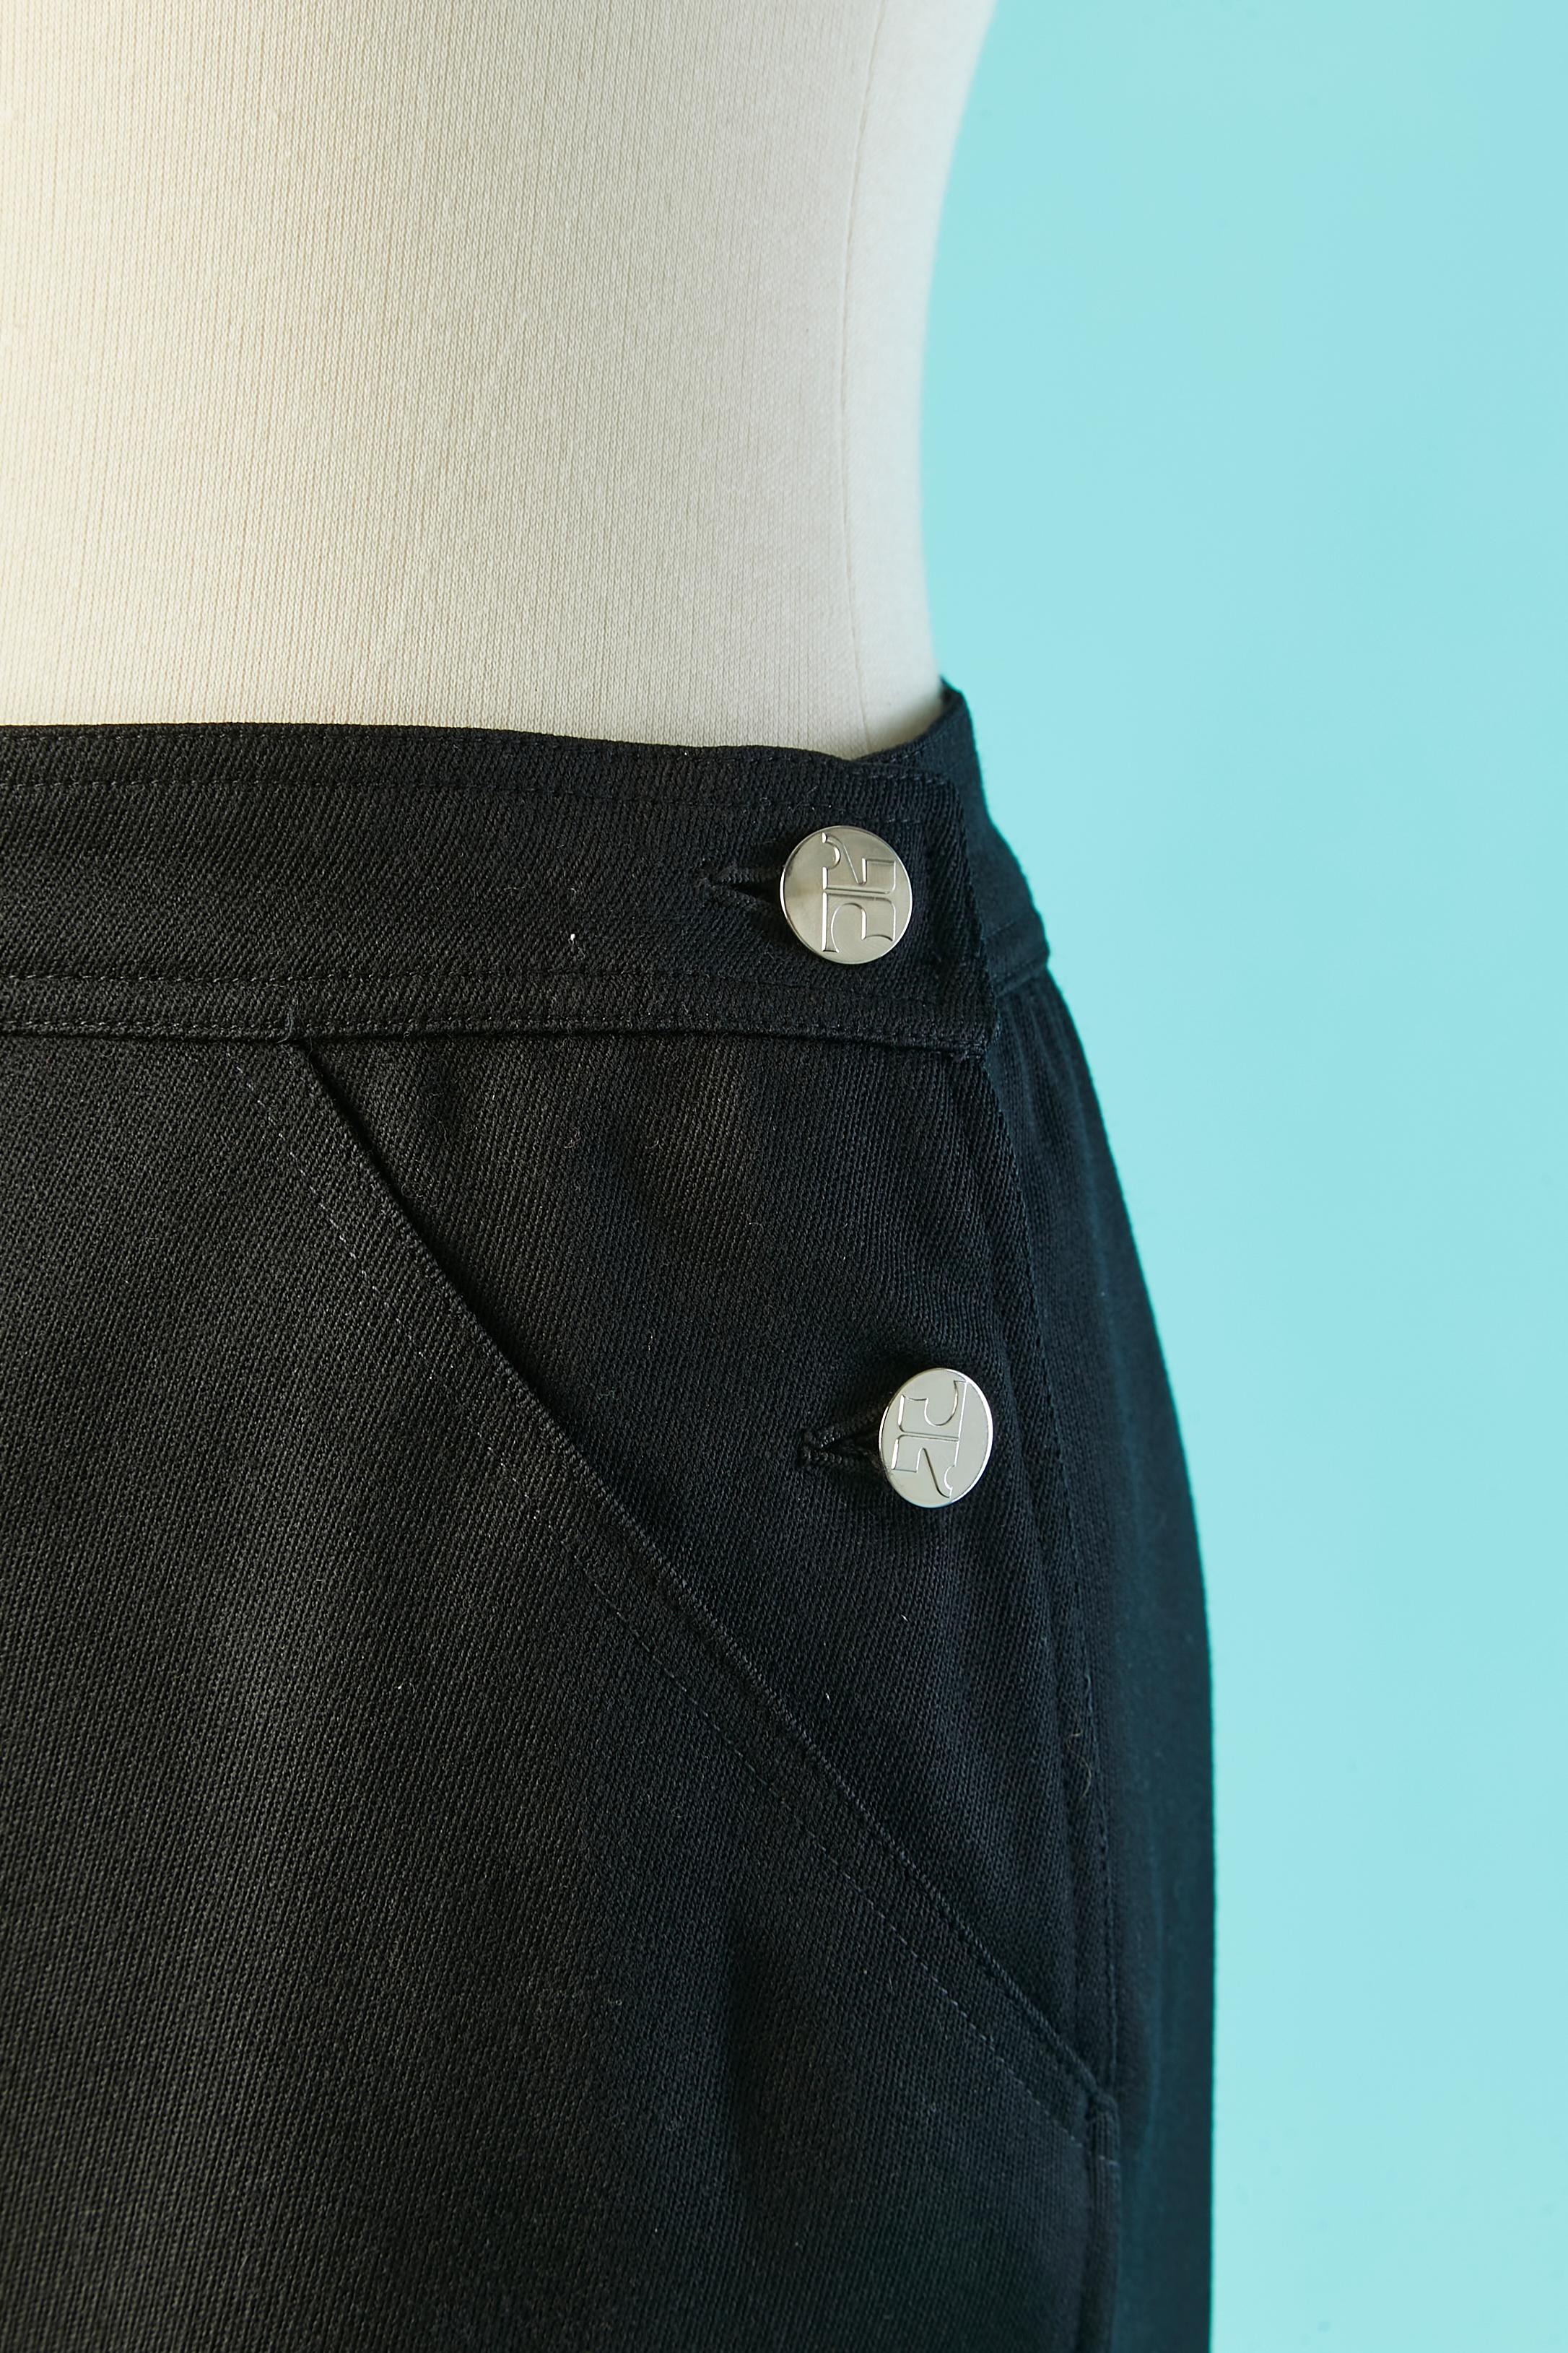 Black A-line skirt with branded button. Main fabric composition : wool & polyester. Acetate lining. Pocket and split on both side, lenght = 15 cm 
SIZE 38 (Fr) M 